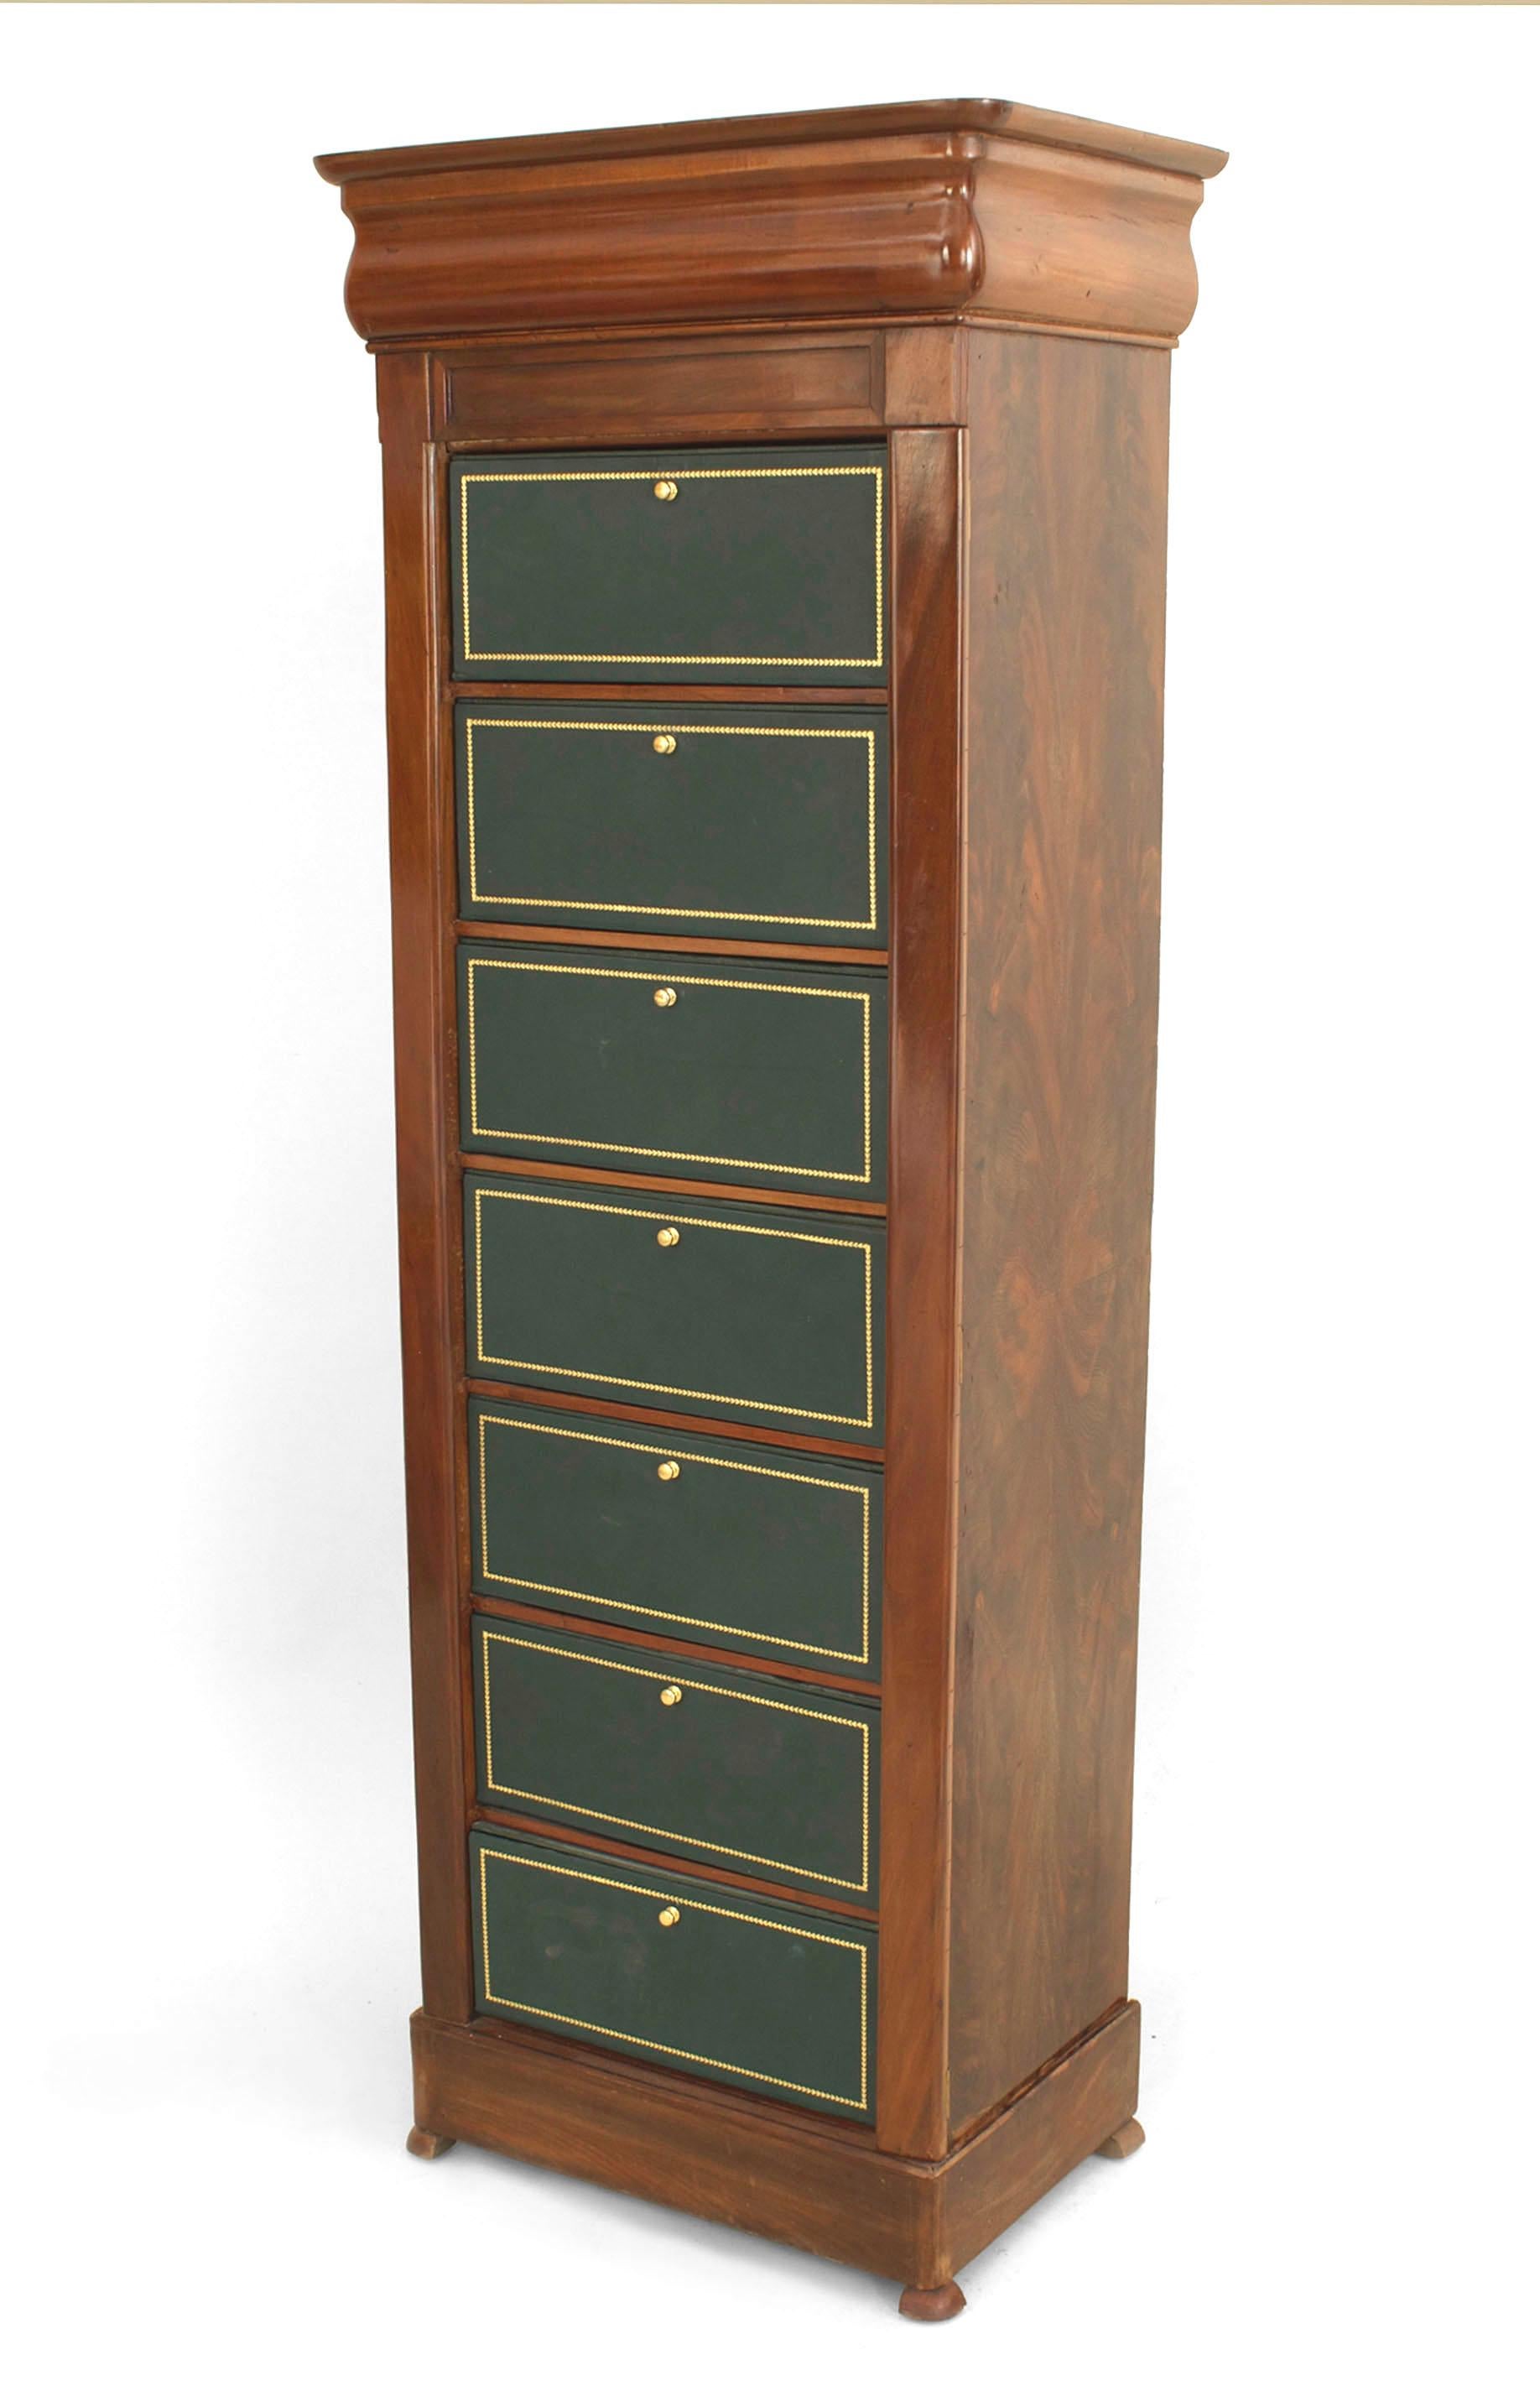 Continental possibly Baltic, mahogany narrow chest of 7 drawers semainier with green leather.
